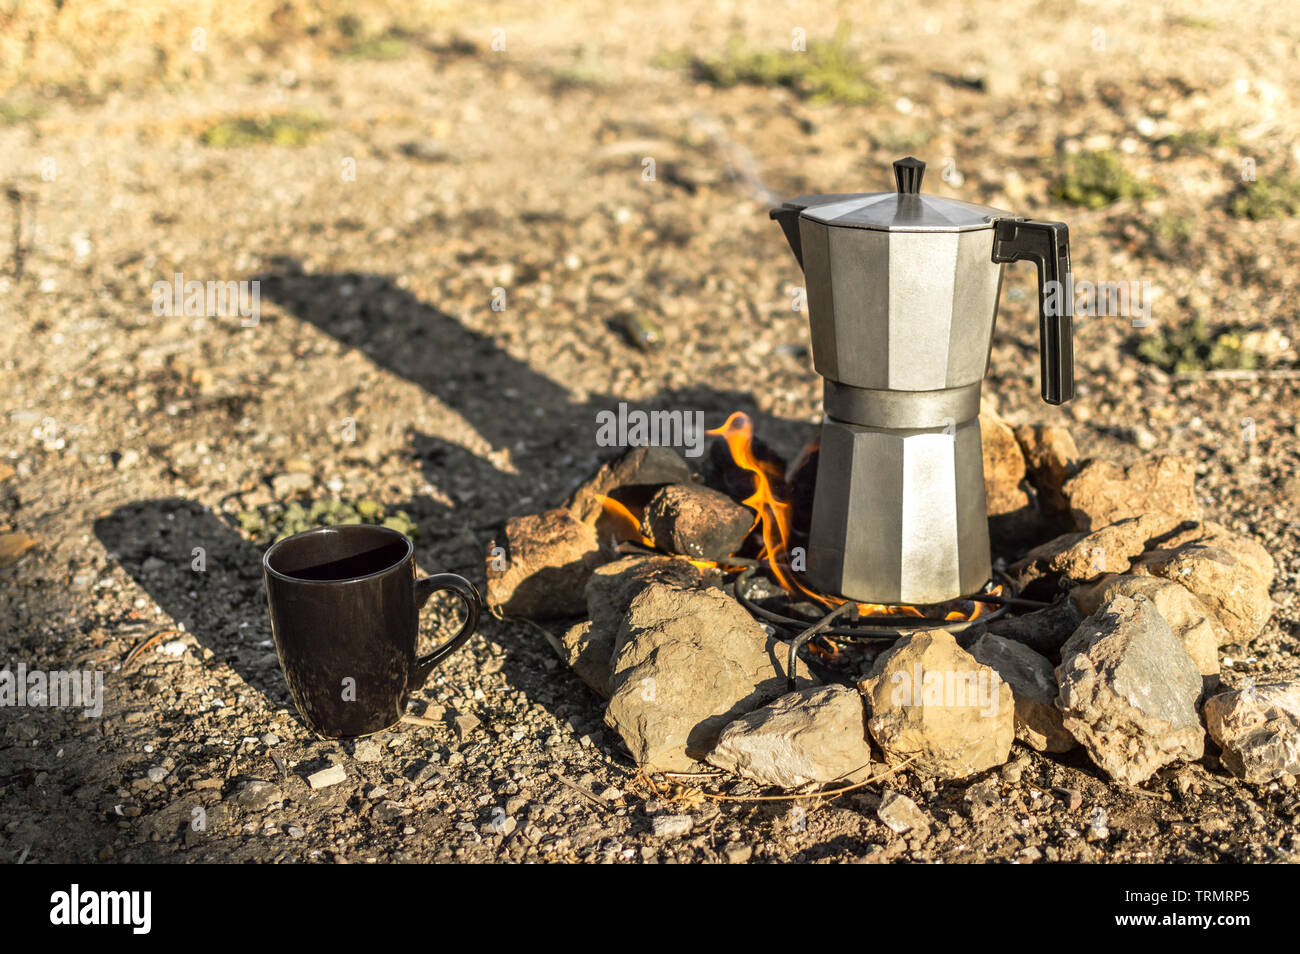 https://c8.alamy.com/comp/TRMRP5/preparing-coffee-with-bonfire-and-moka-pot-coffee-maker-resting-during-a-camp-in-nature-overhead-view-of-firewood-burning-cup-and-coffee-machine-TRMRP5.jpg